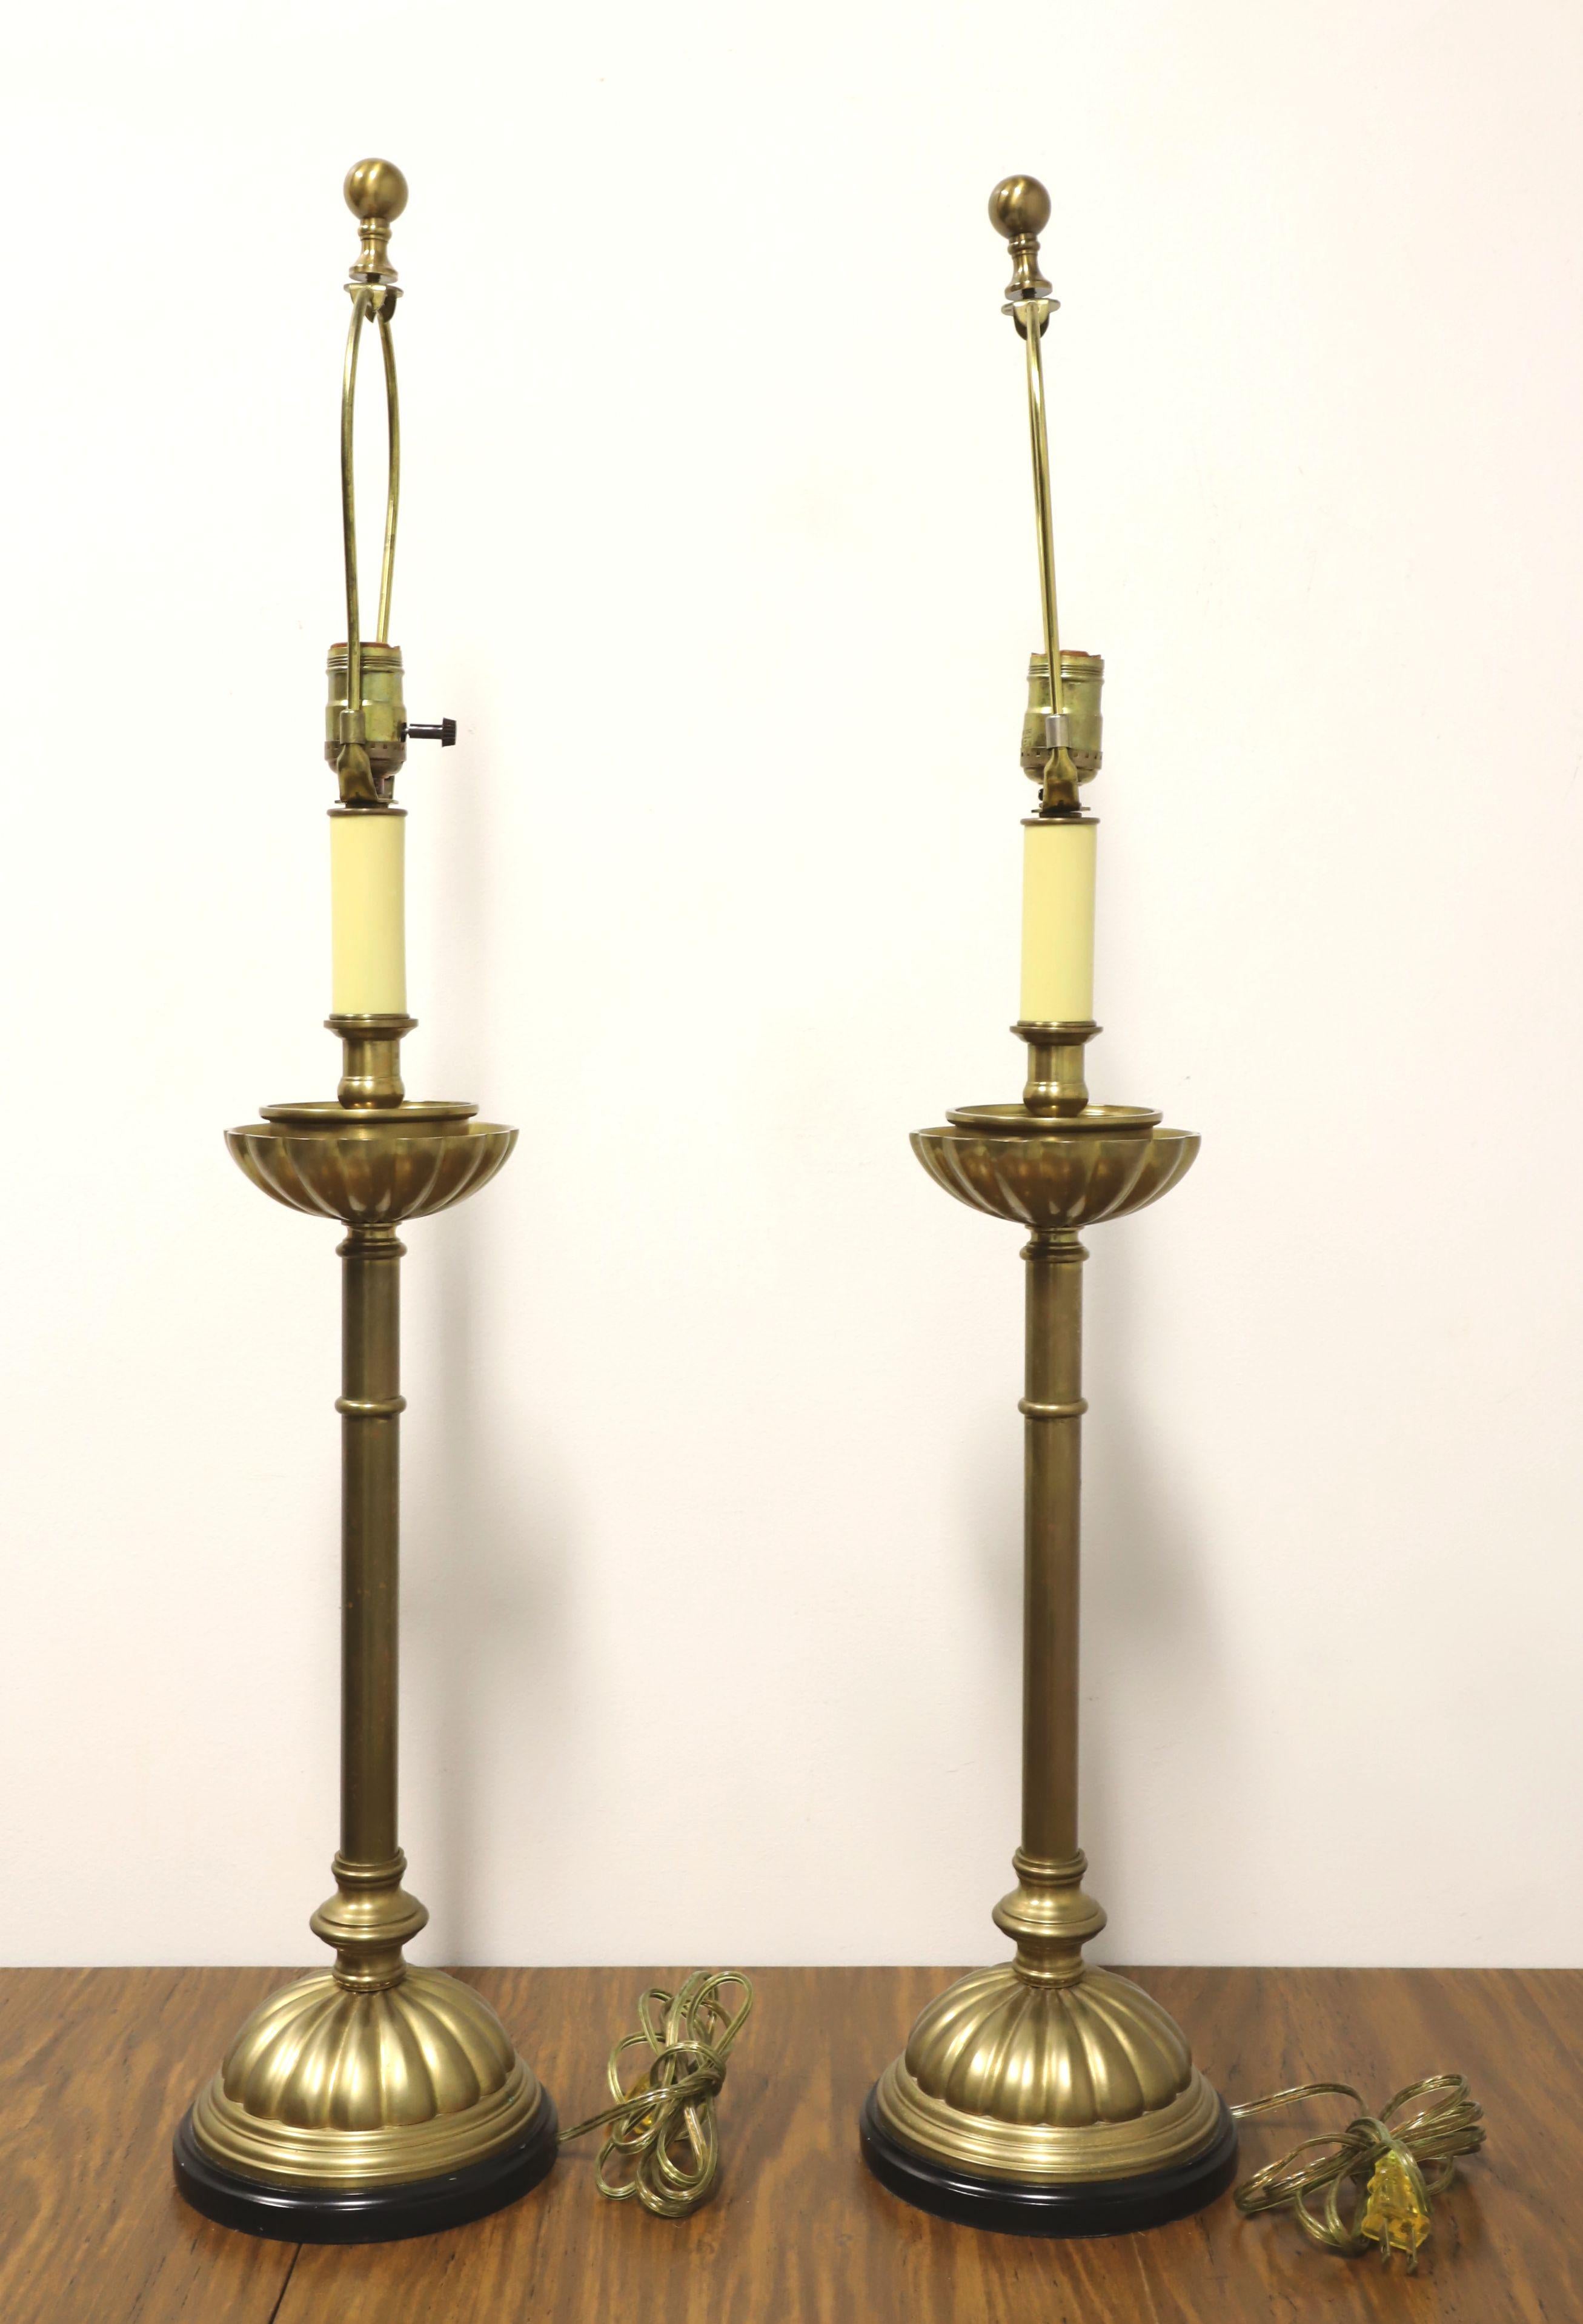 American Vintage Brass Traditional Candlestick Table Lamps - Pair